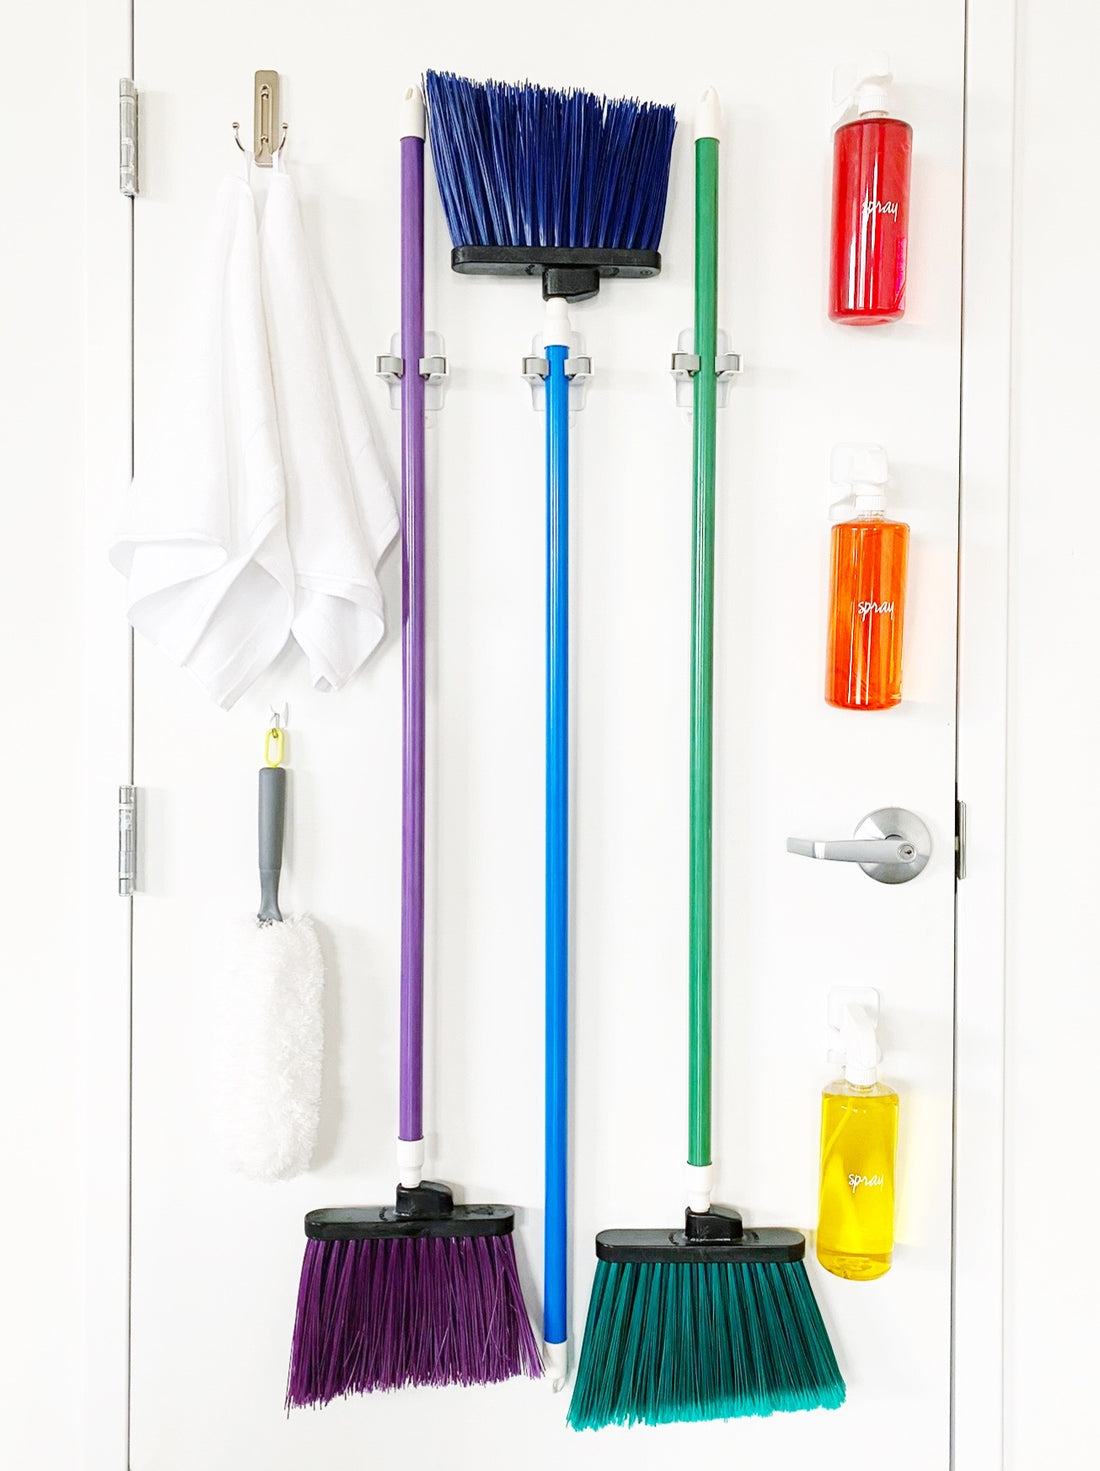 [THE] Door Storage to Simplify Your Cleaning Routine